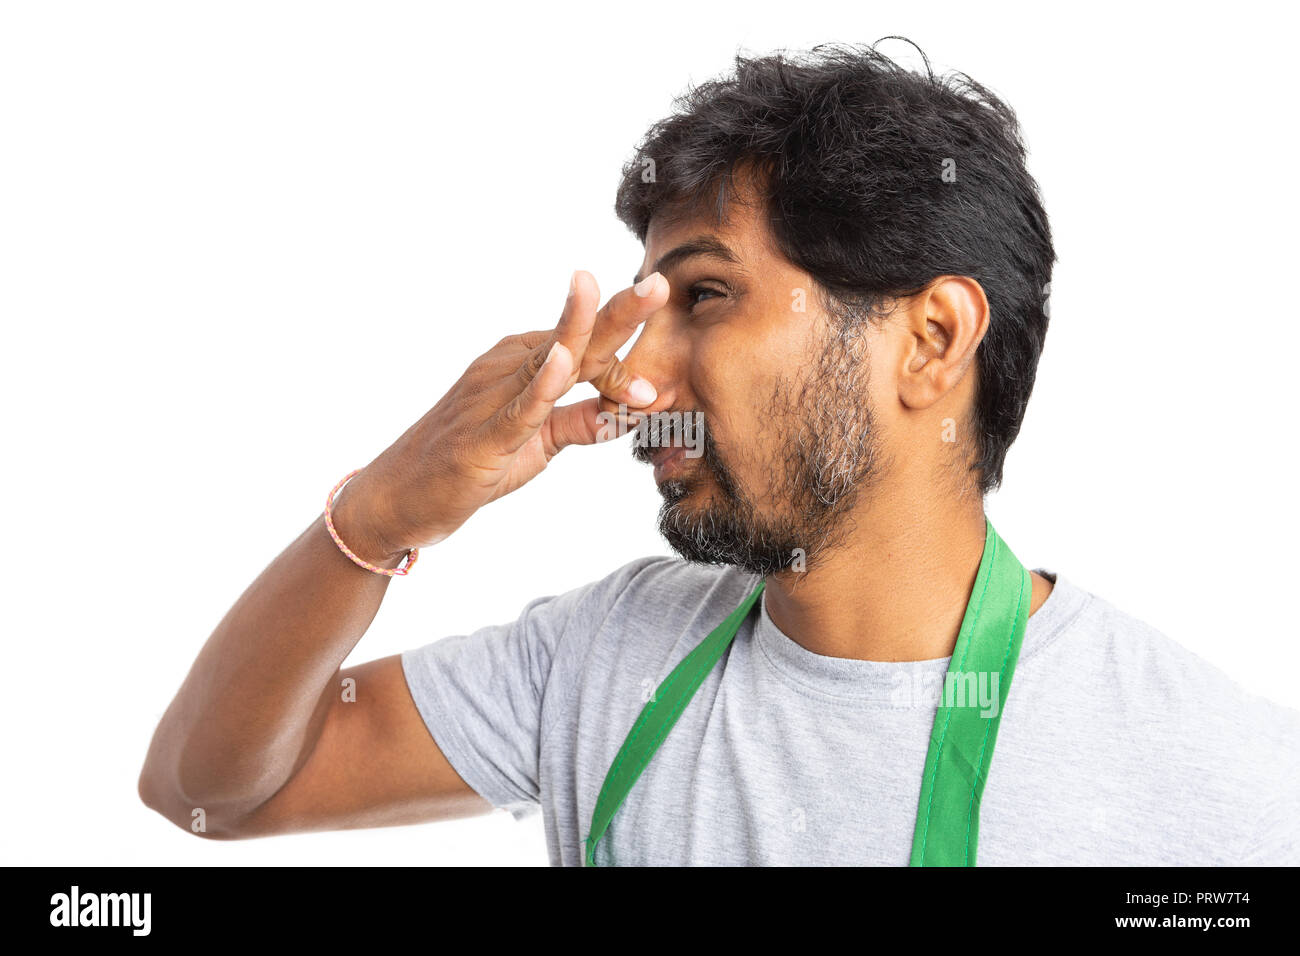 Disgusted supermarket or hypermarket employee holding nose with hand with repulsive expression isolated on white studio background Stock Photo